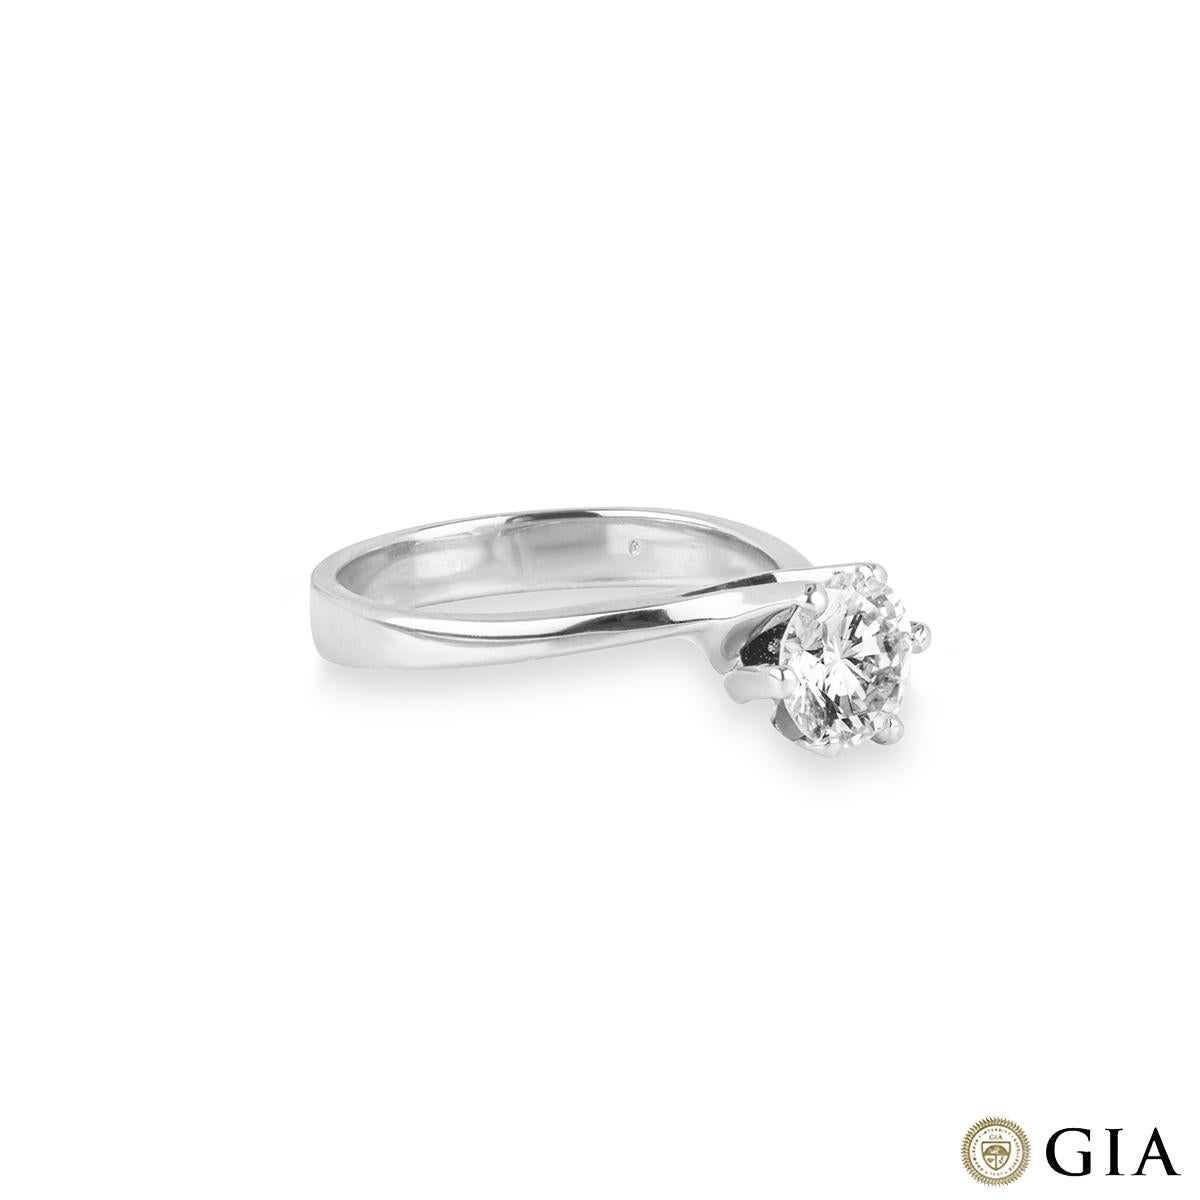 GIA Cert White Gold Round Brilliant Cut Diamond Engagement Ring 1.07ct J/SI1 In Excellent Condition For Sale In London, GB